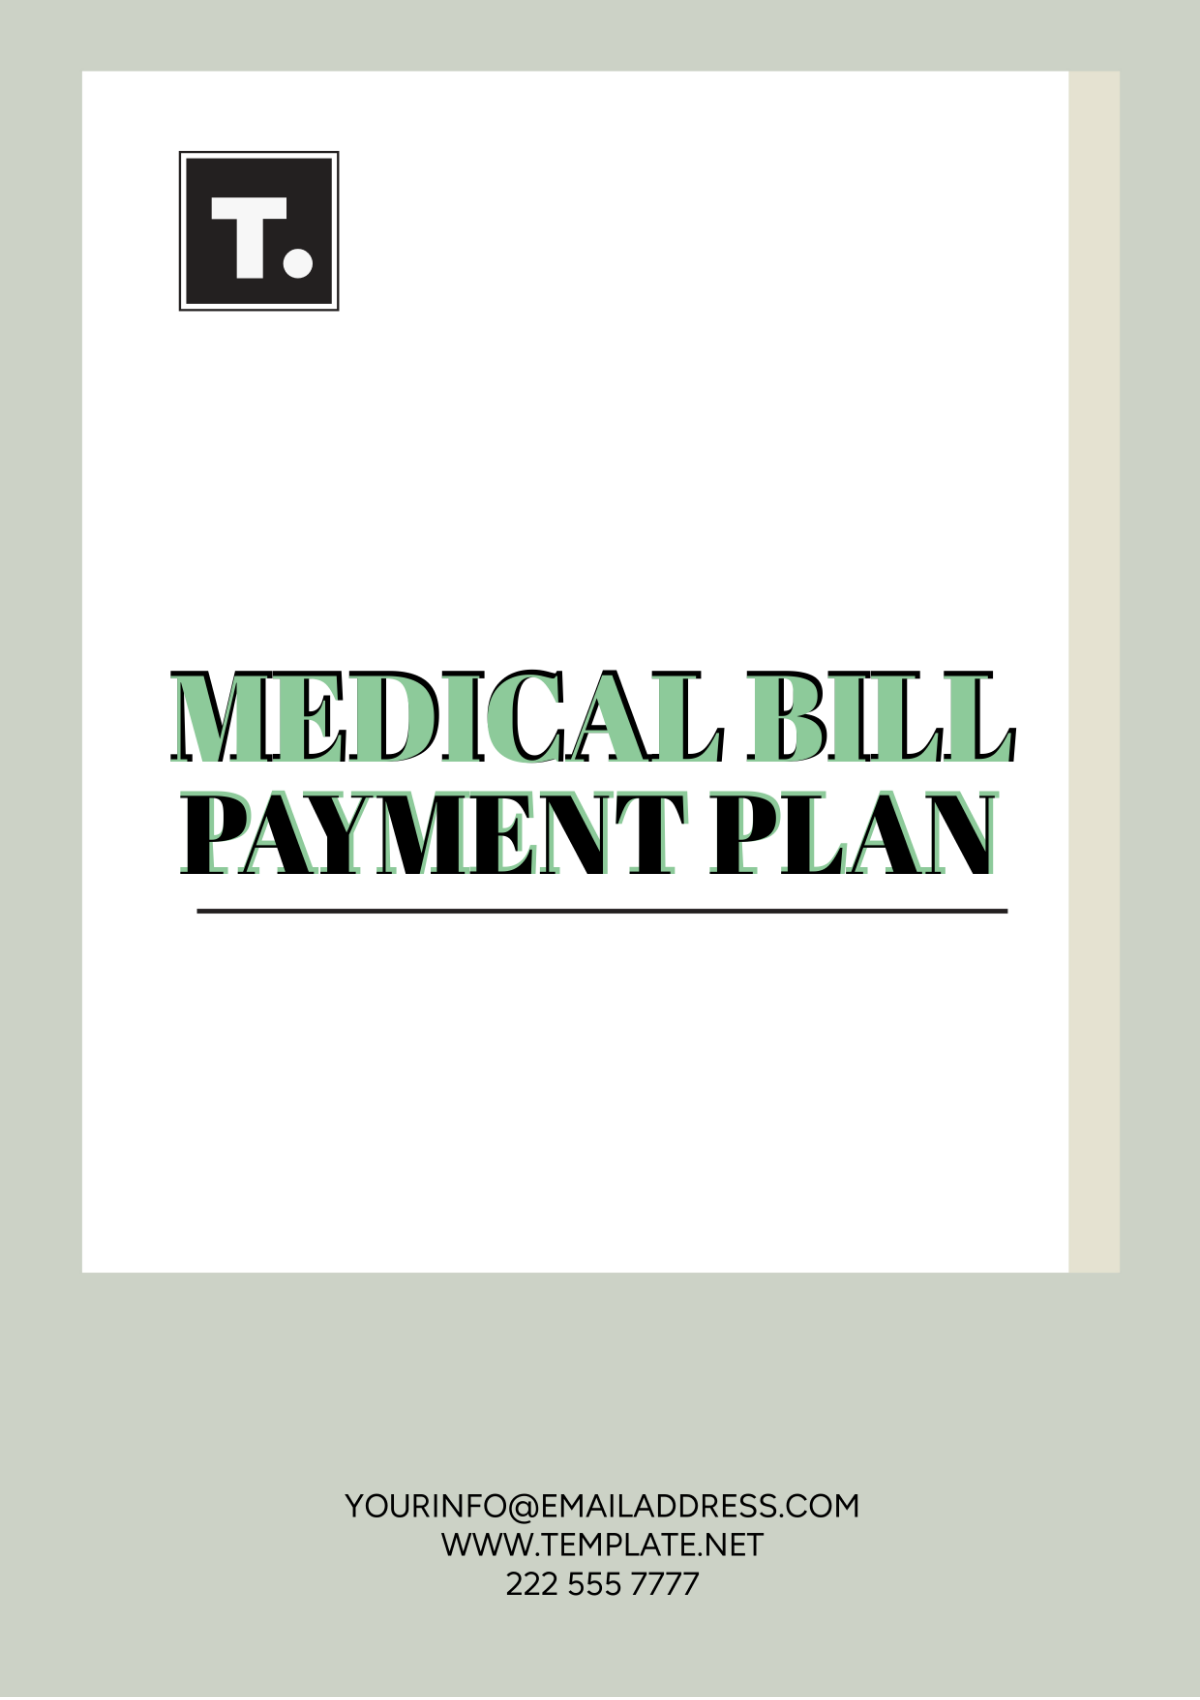 Free Medical Bill Payment Plan Template